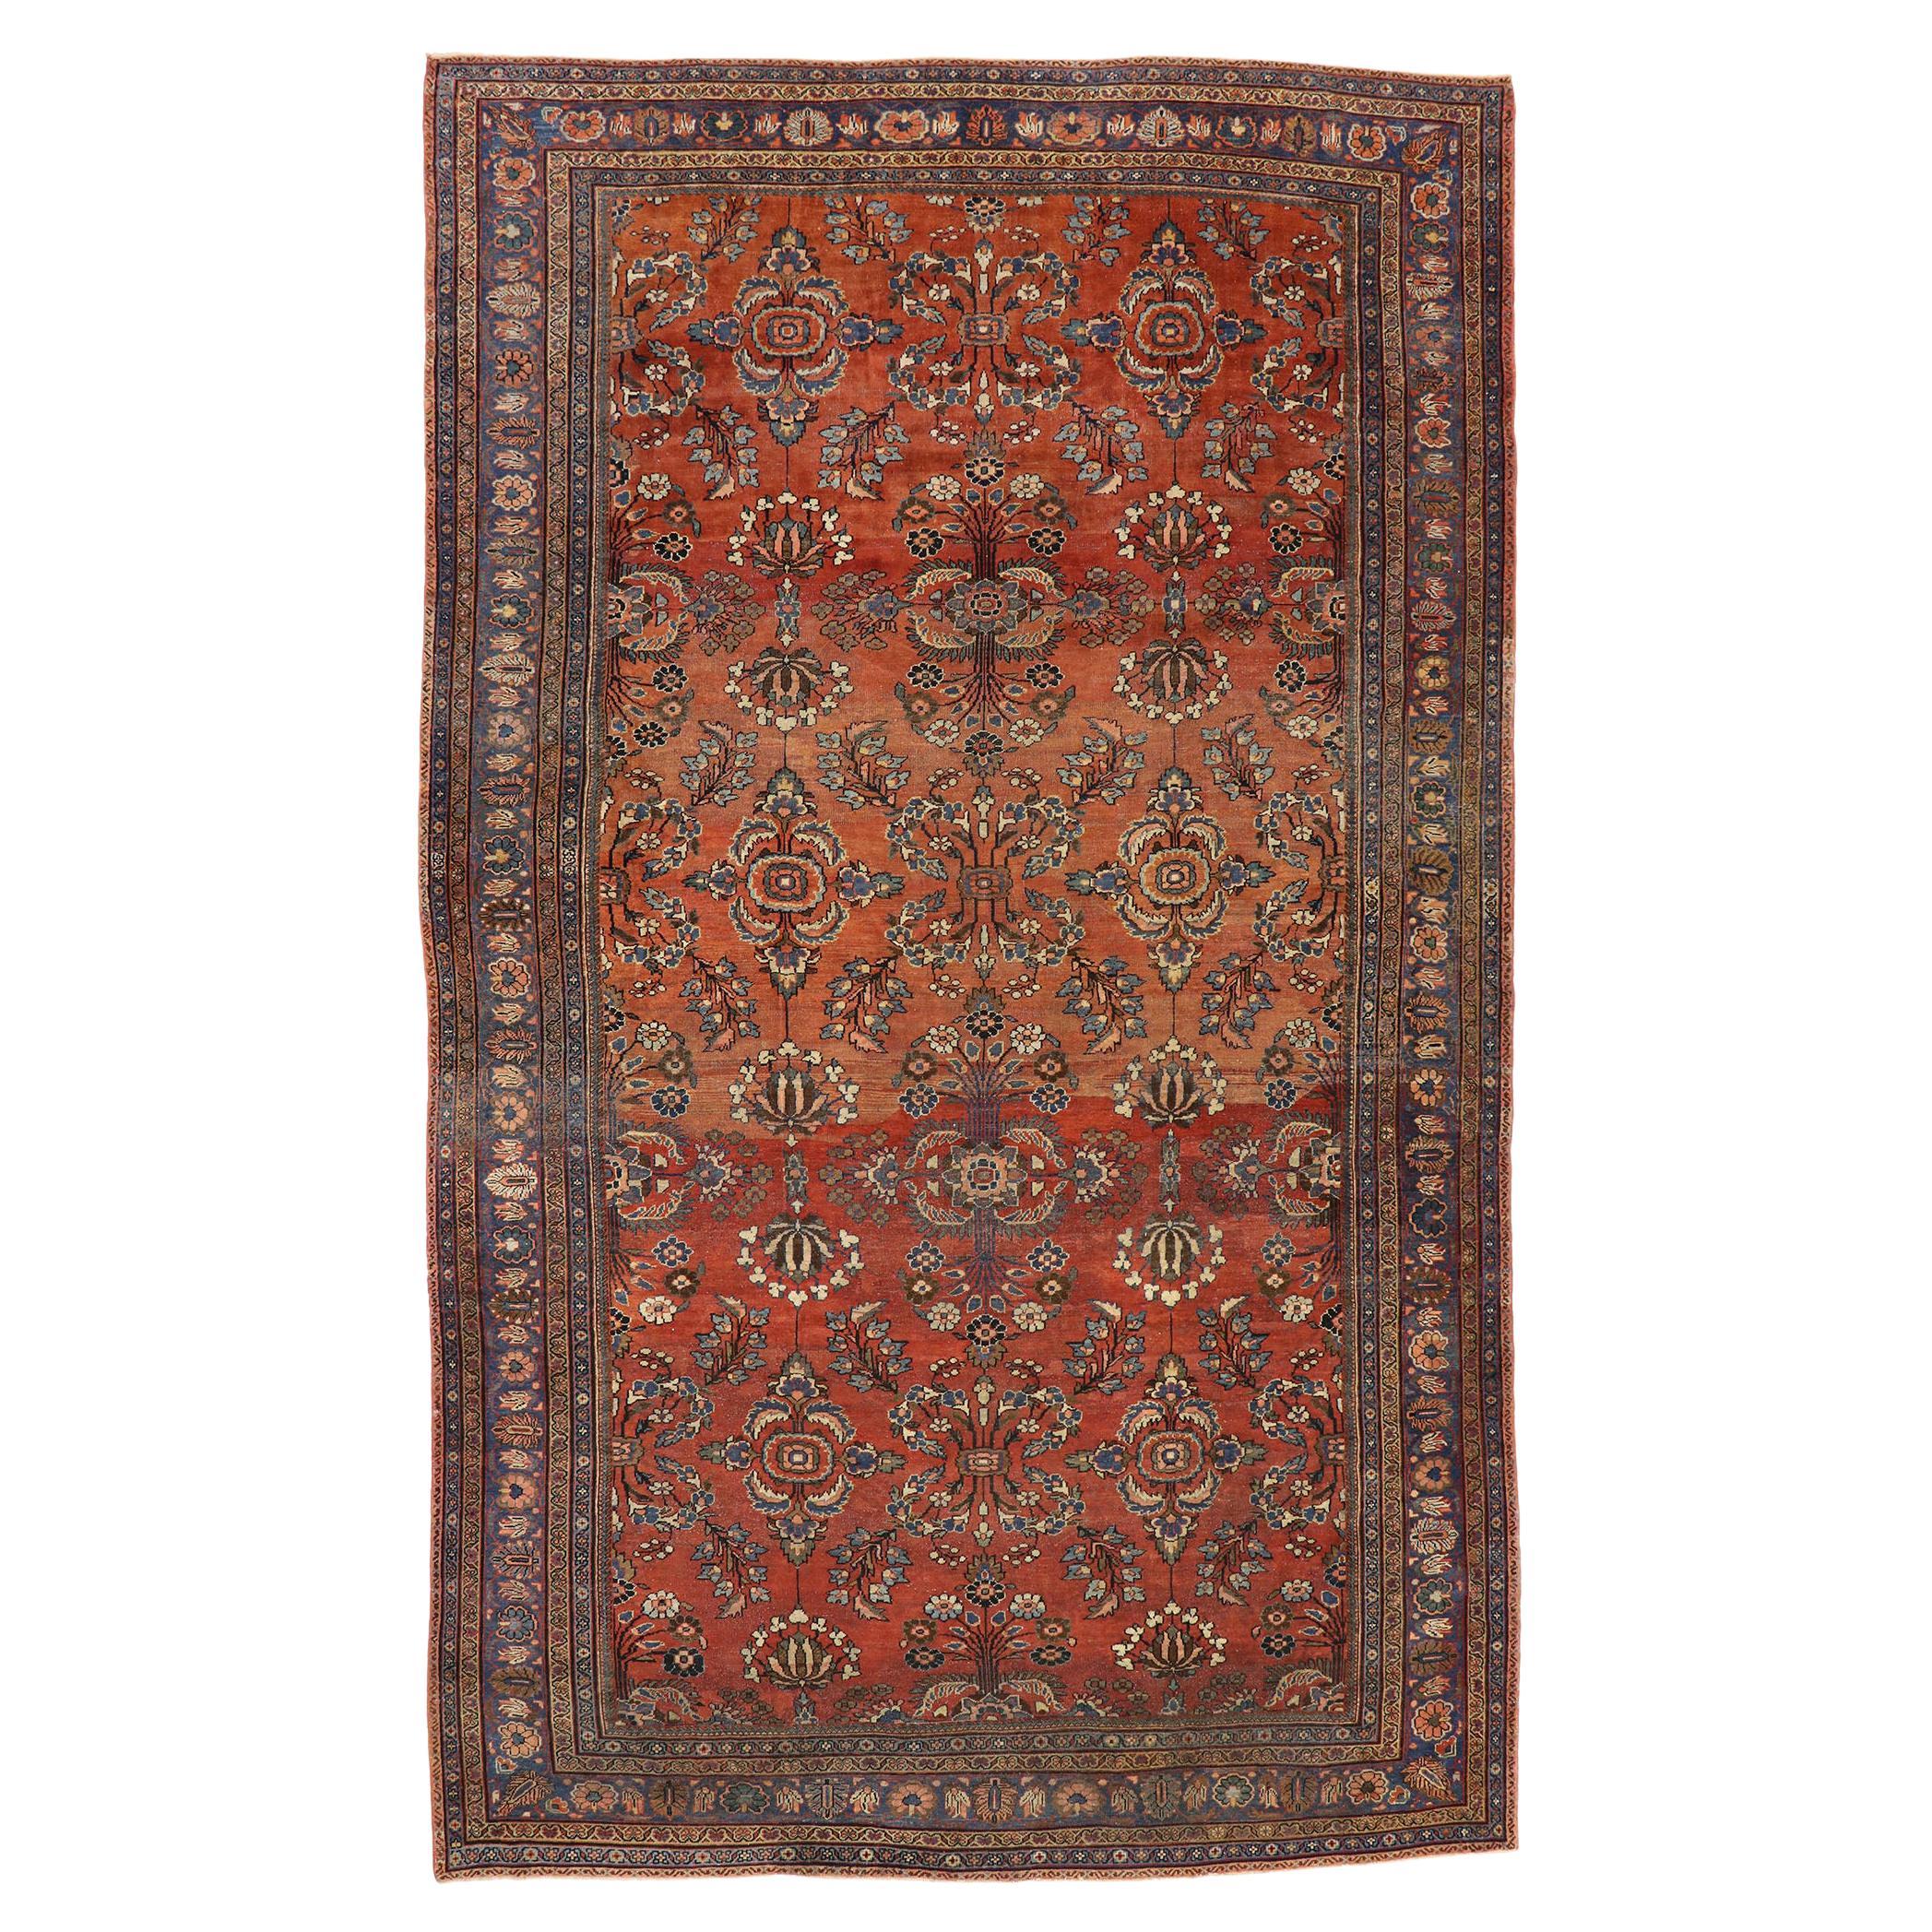 Antique Mahal Persian Palace Size Rug with Manor House Tudor Style For Sale